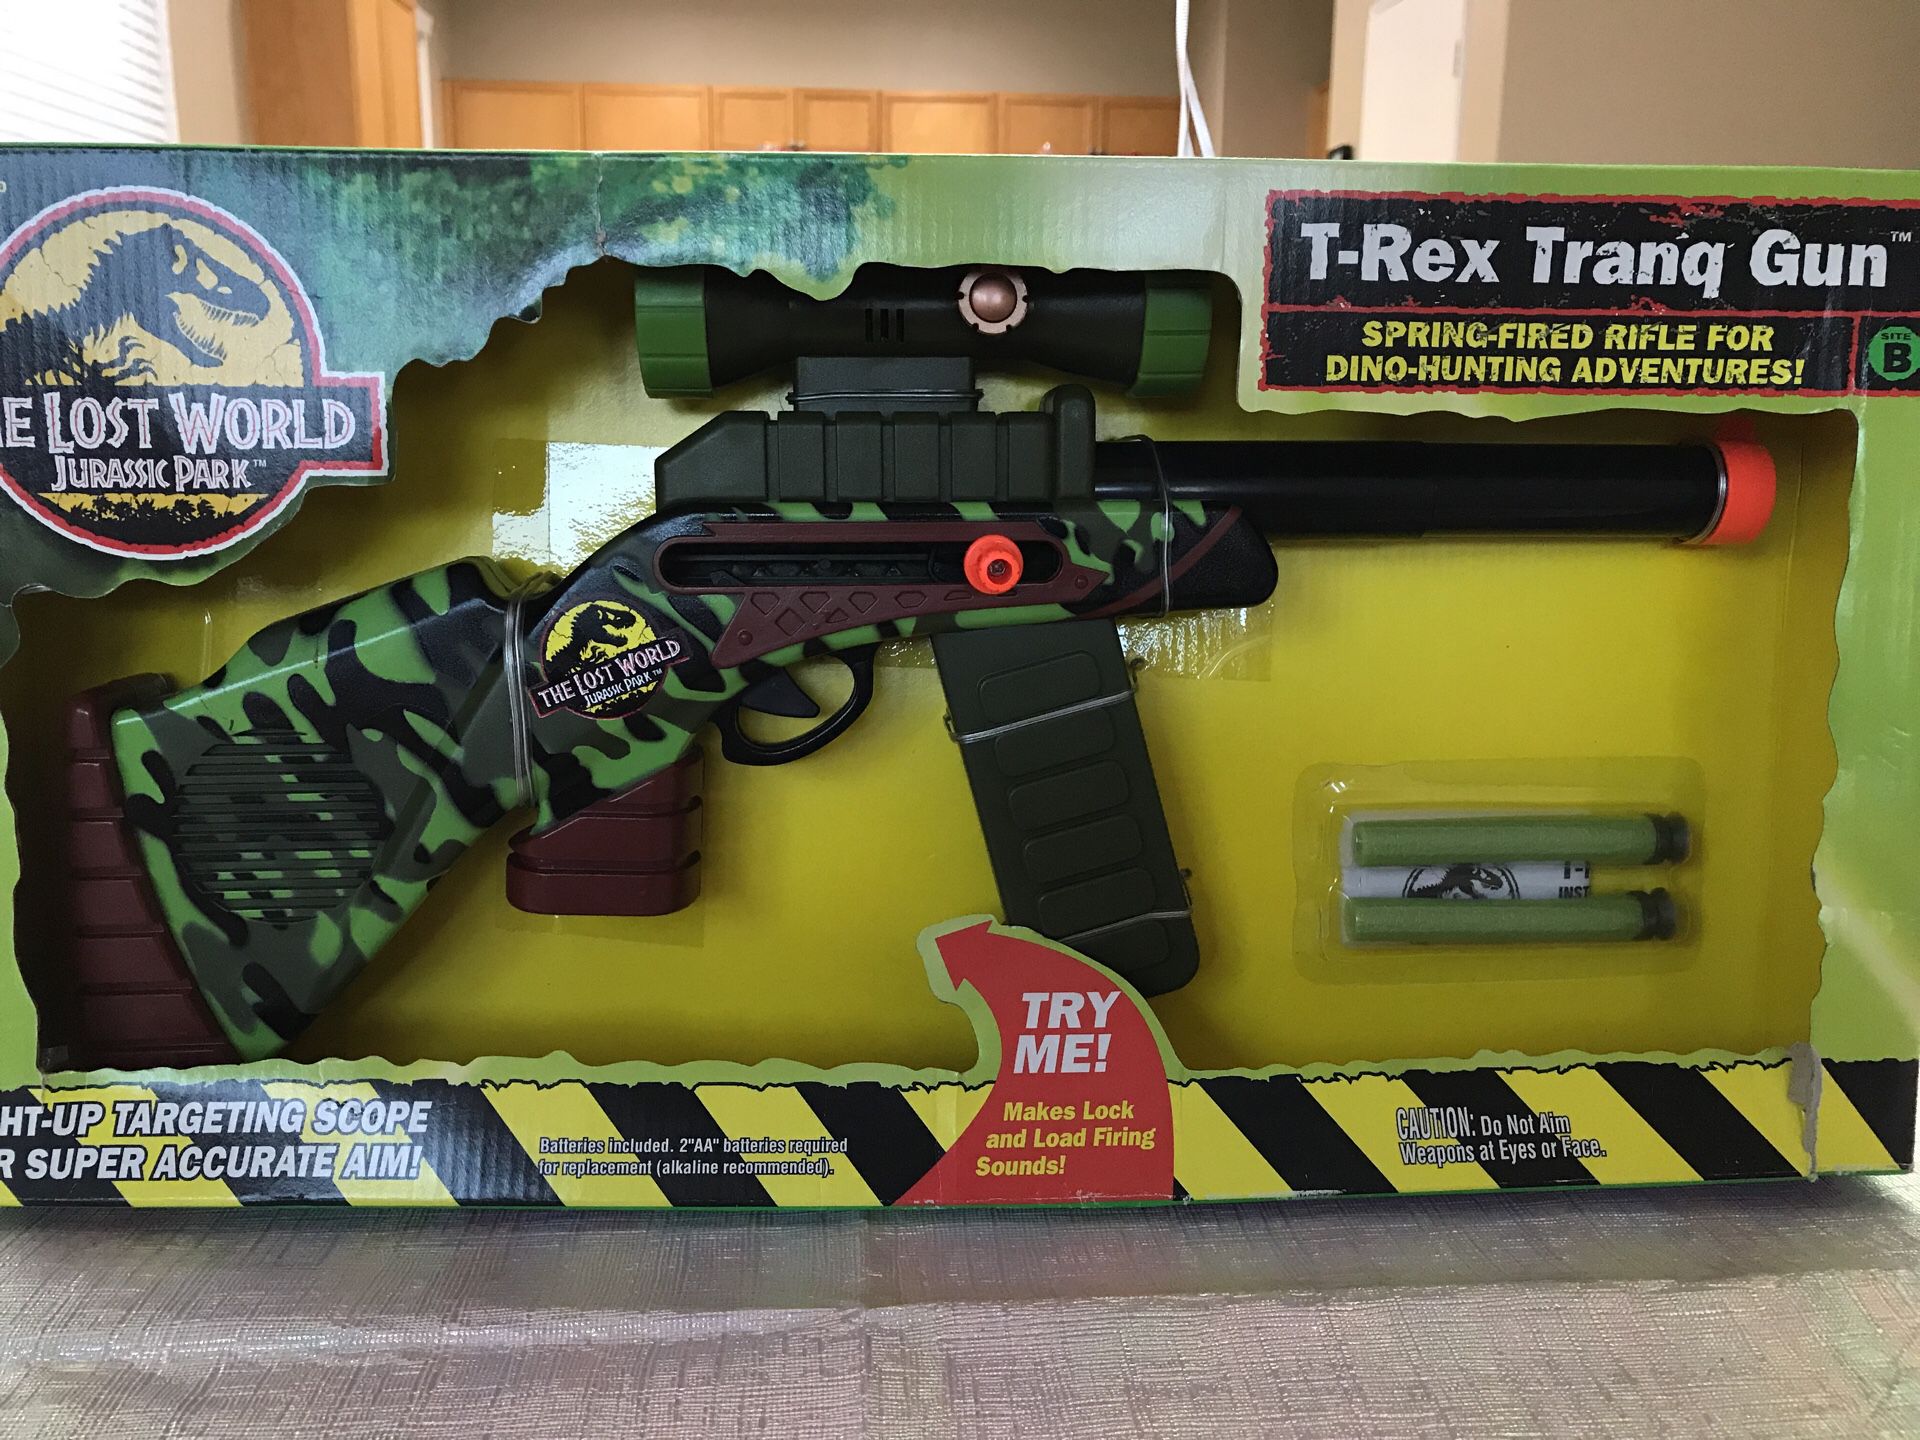 Lim sagsøger underordnet The Lost World Jurassic Park T - Rex Tranquil Gun Spring - Fired Rifle for  Dino Hunting Adventure ,also has Light up Targeting Scope for Super Accura  for Sale in Orange, CA - OfferUp